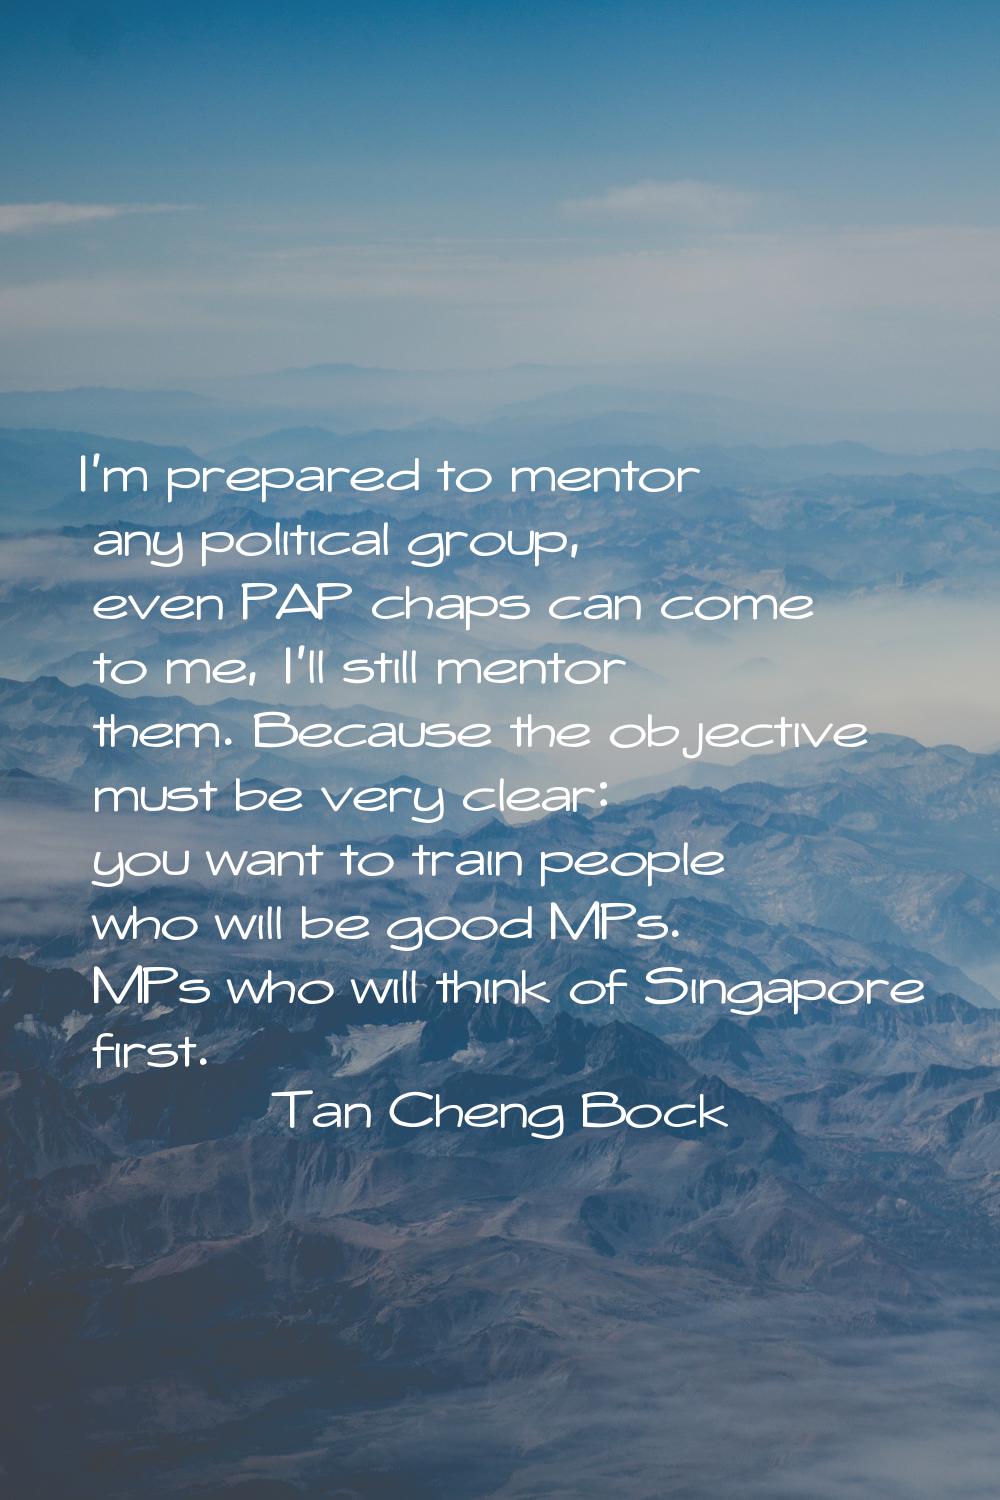 I'm prepared to mentor any political group, even PAP chaps can come to me, I'll still mentor them. 